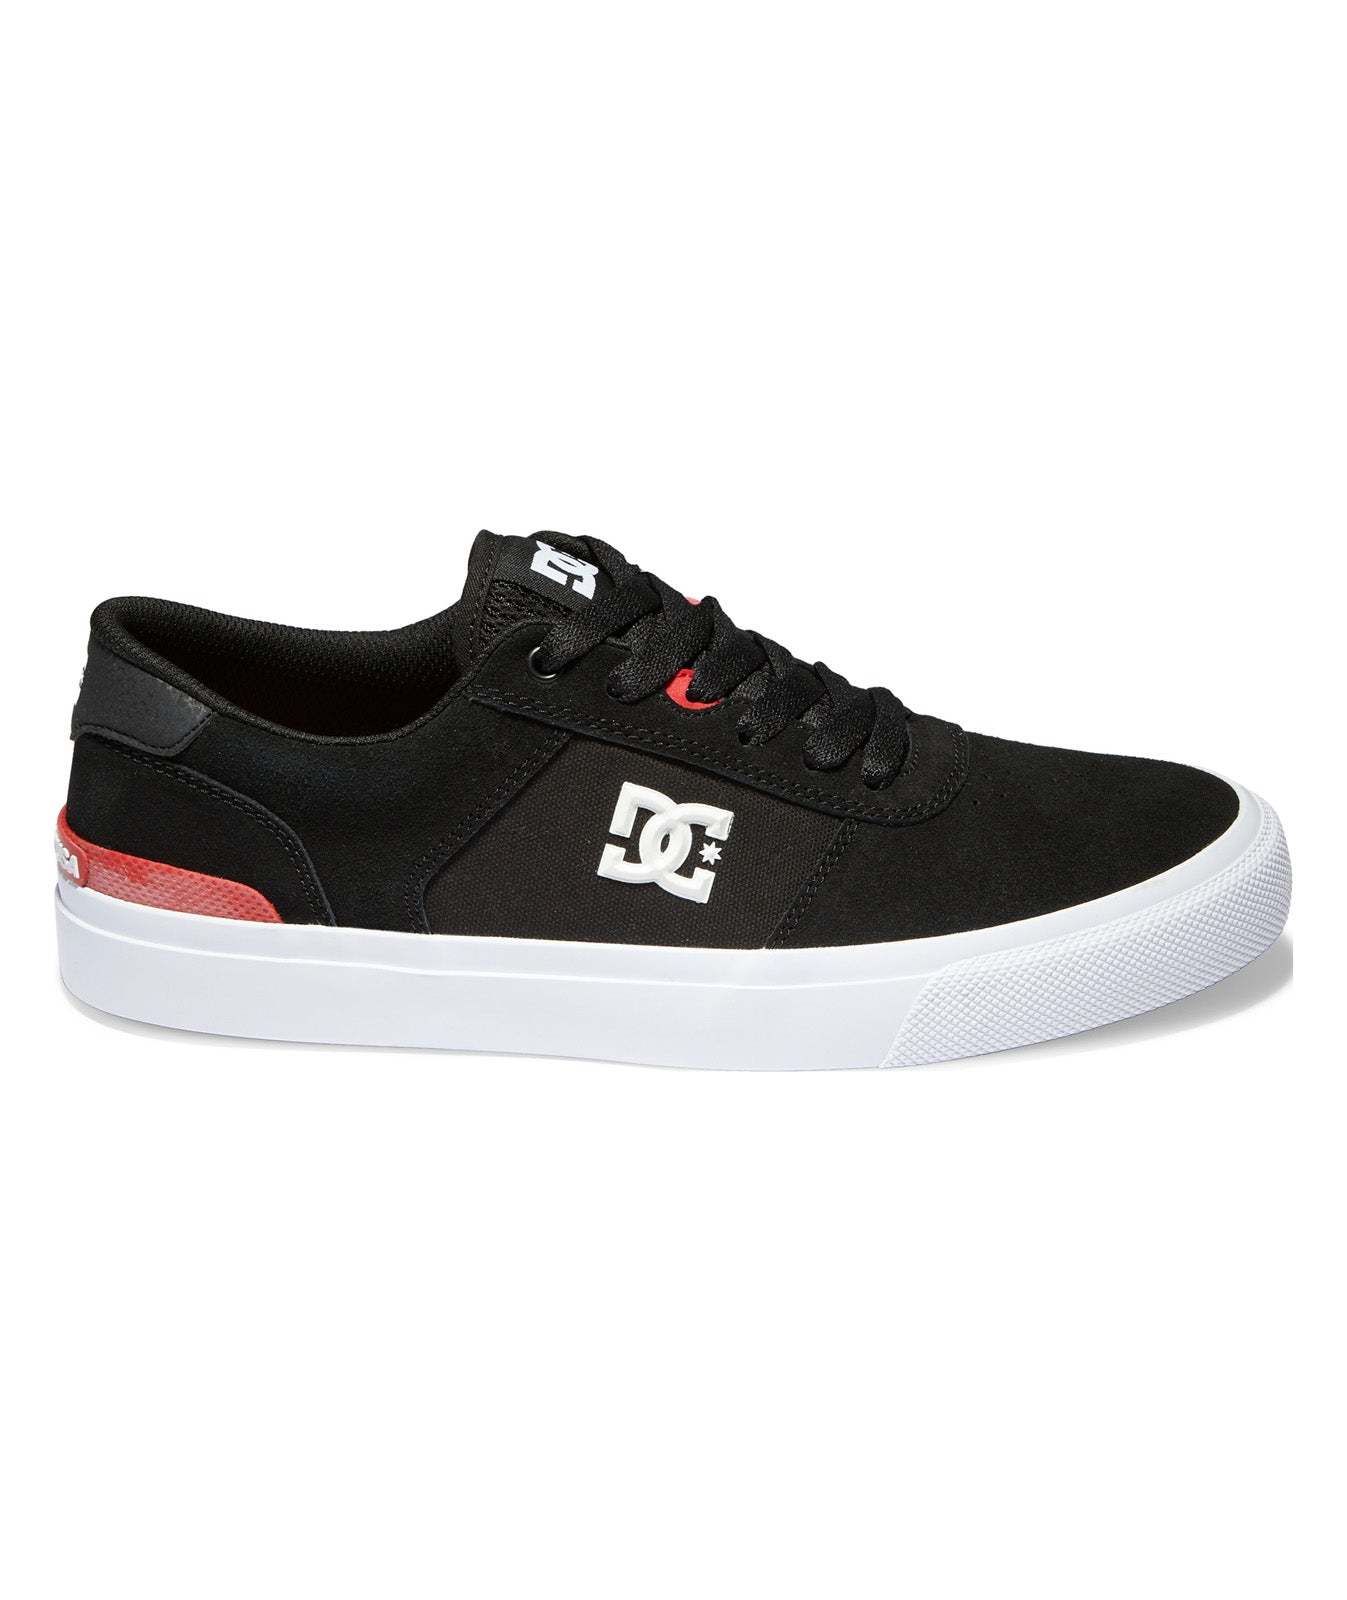 dc teknic s adys300739-bkw mens black suede skate inspired sneakers shoes